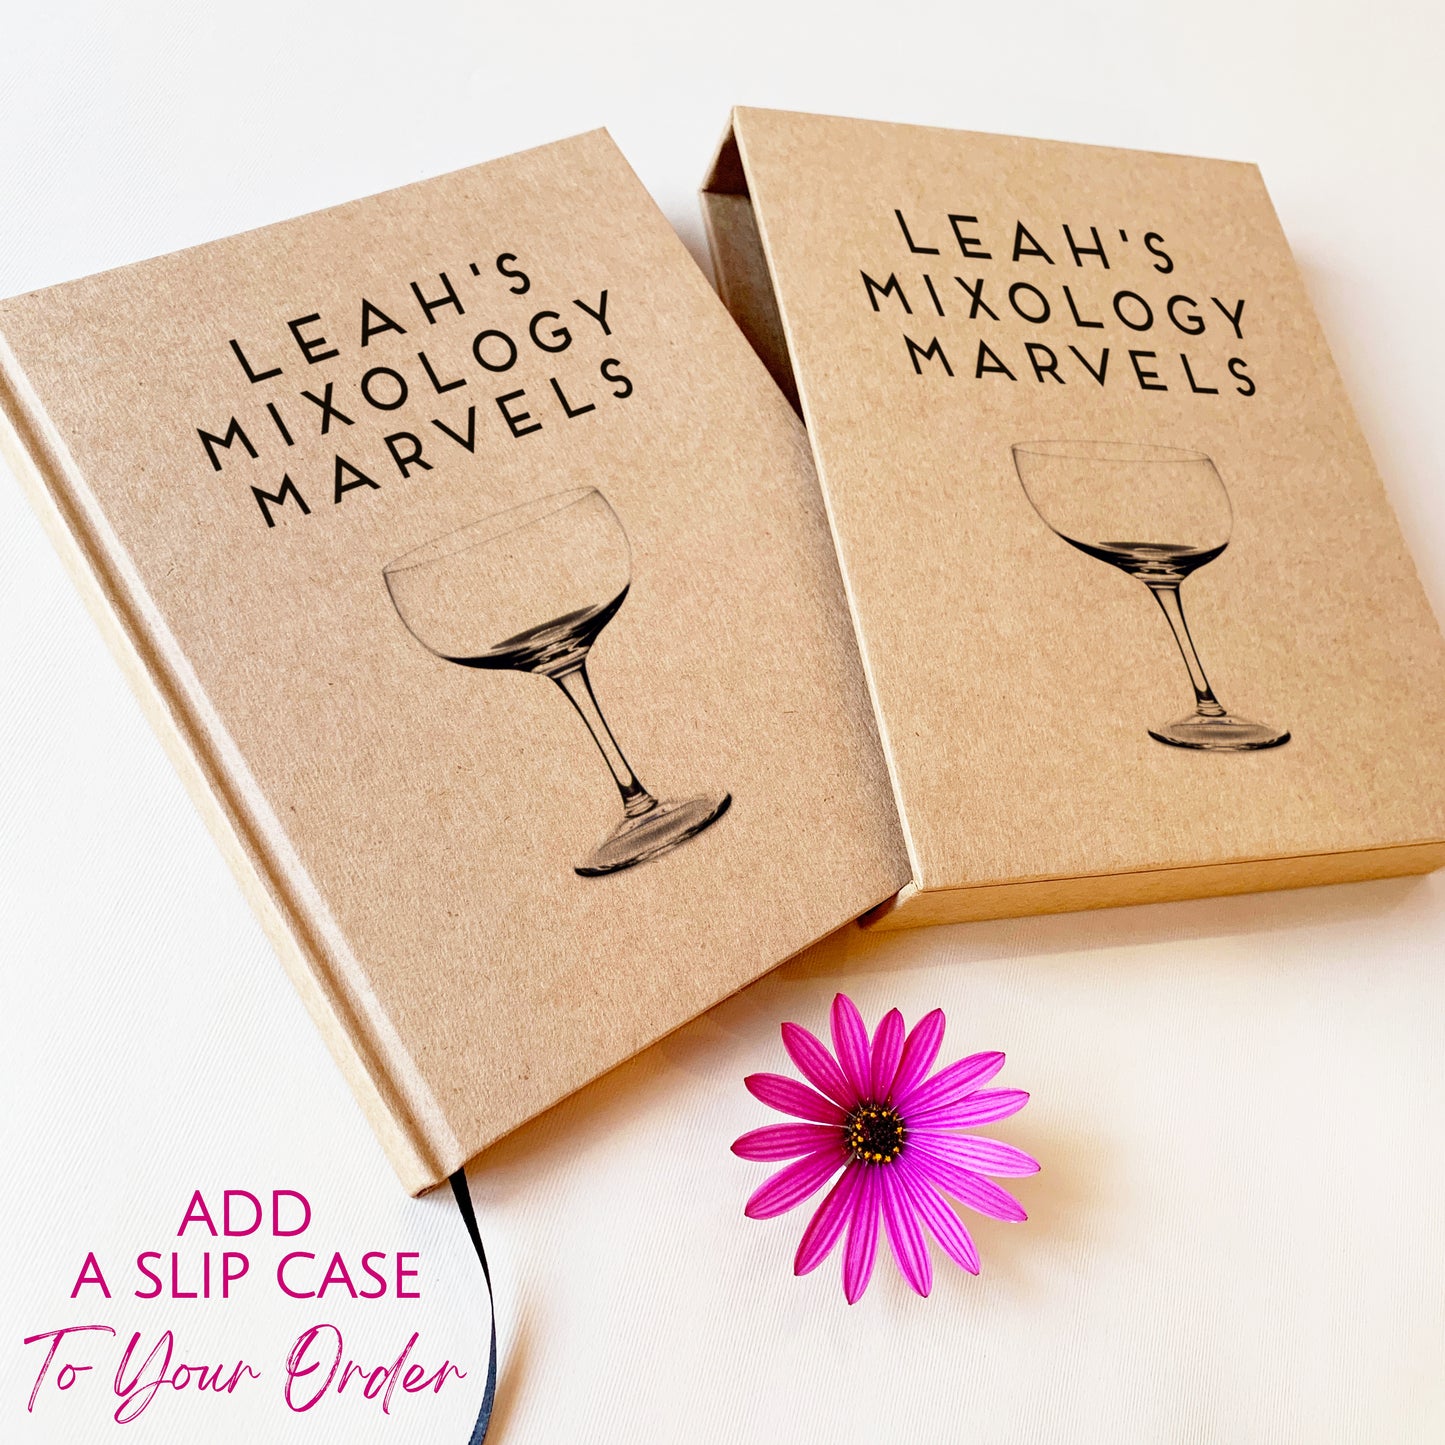 Personalized Cocktail Recipe Book · Hand bound Gift Notebook for Bartender, Mixologist or Hostess